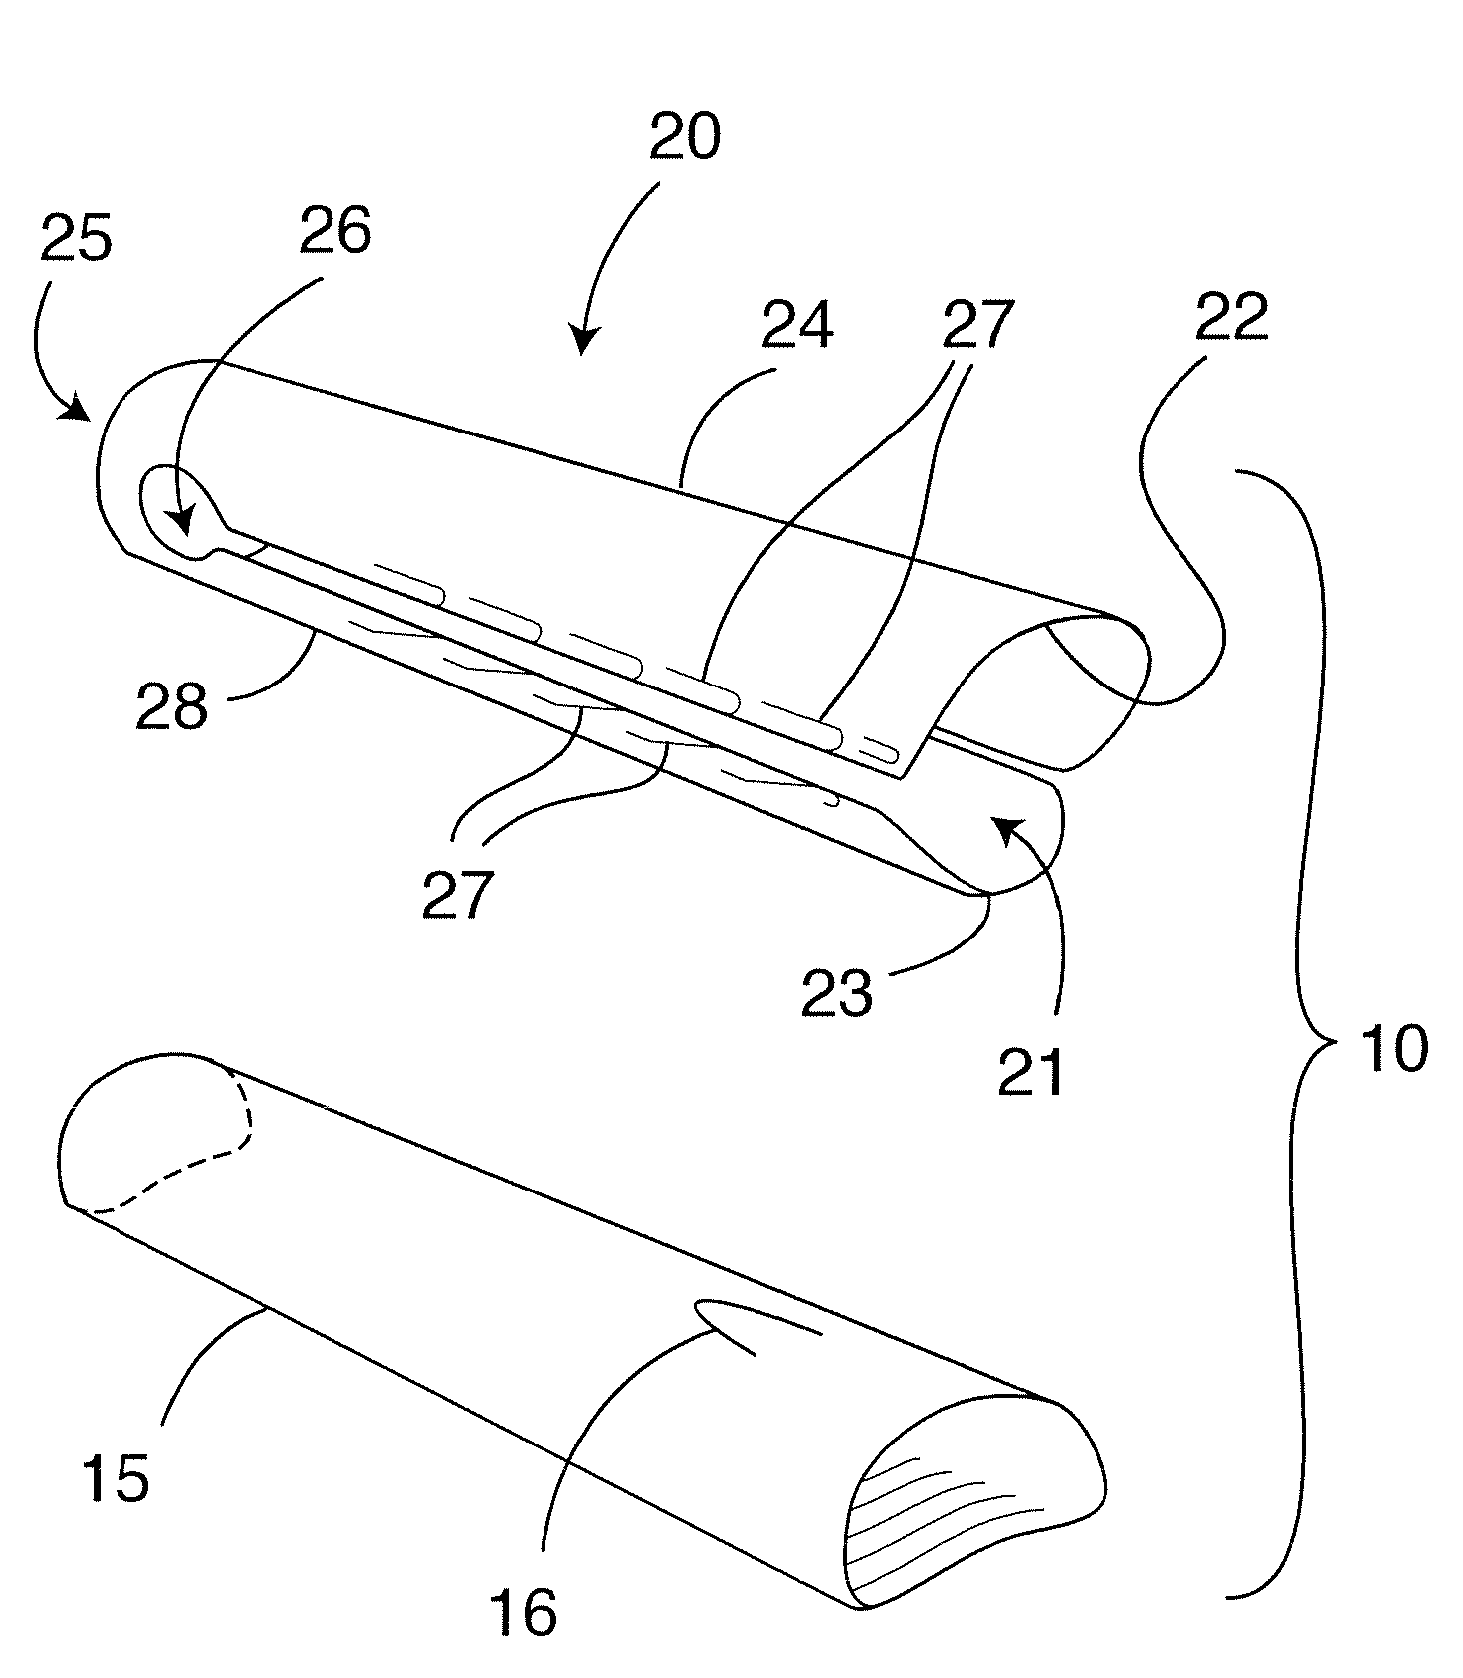 Surgical buttress assemblies and methods of uses thereof